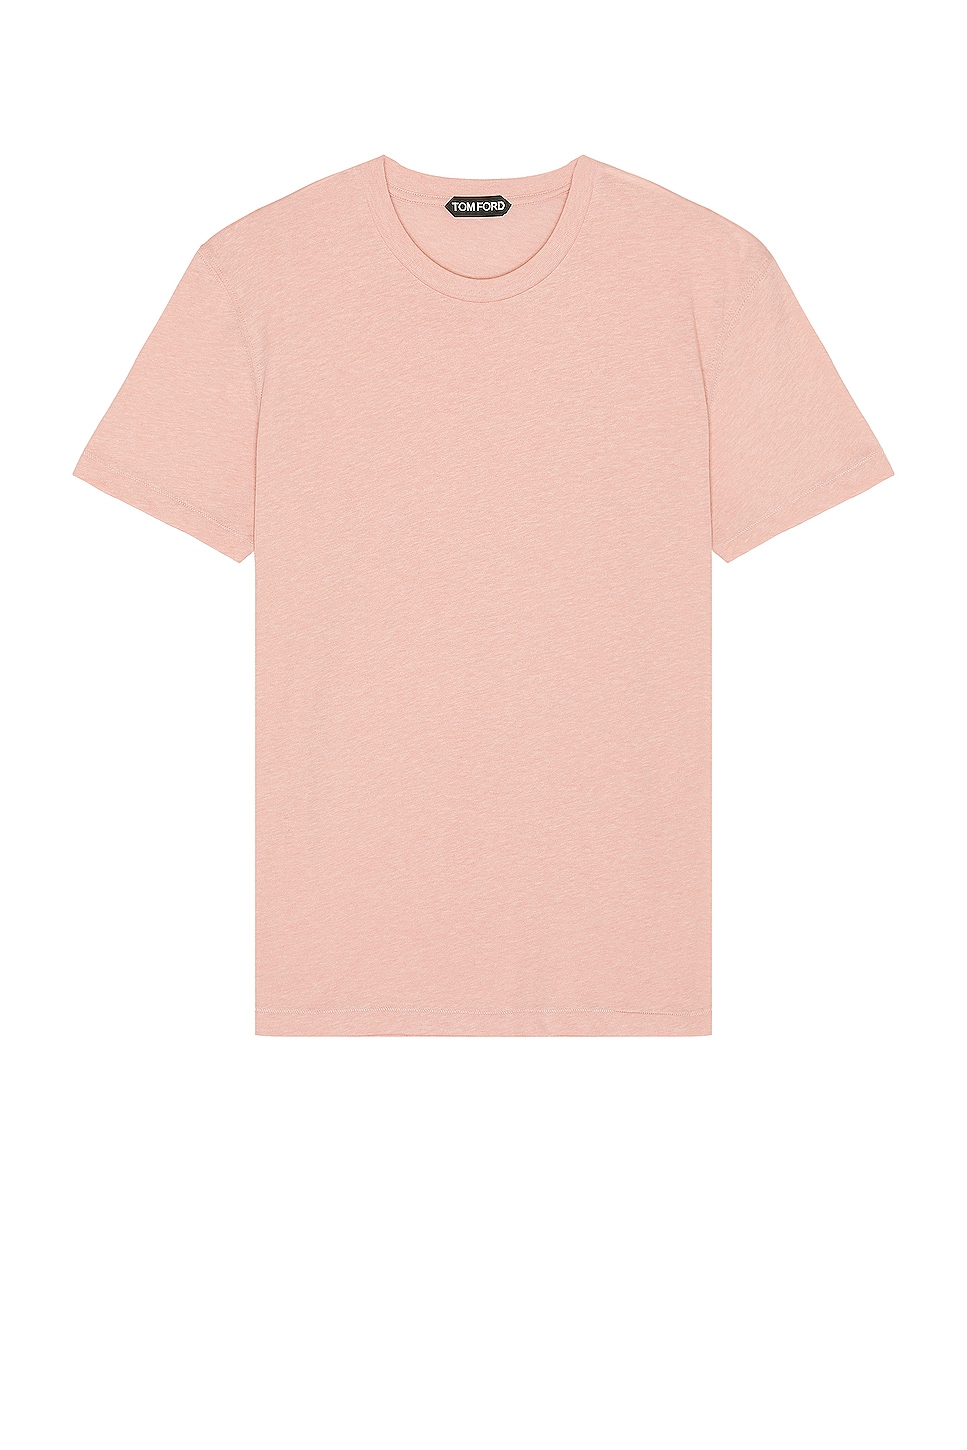 Image 1 of TOM FORD Melange Crew in Soft Peach